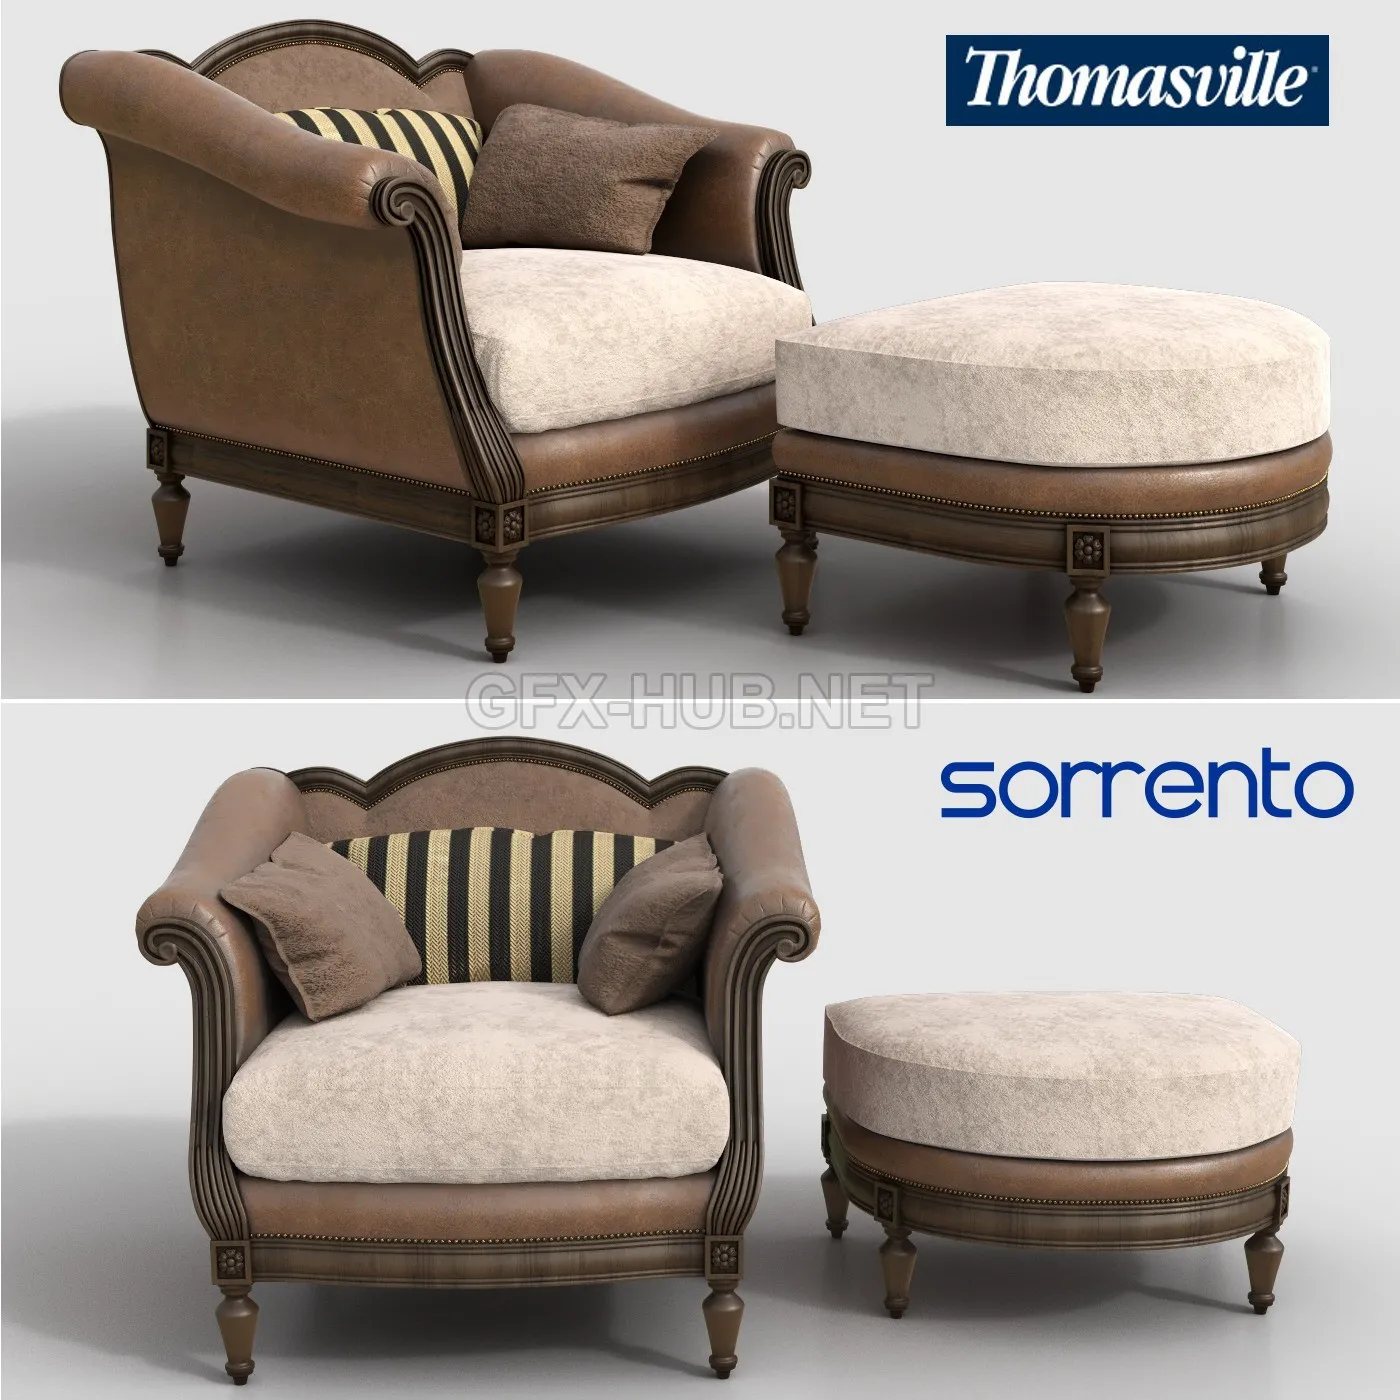 Thomasville chair and ottoman Sorrento – 4250